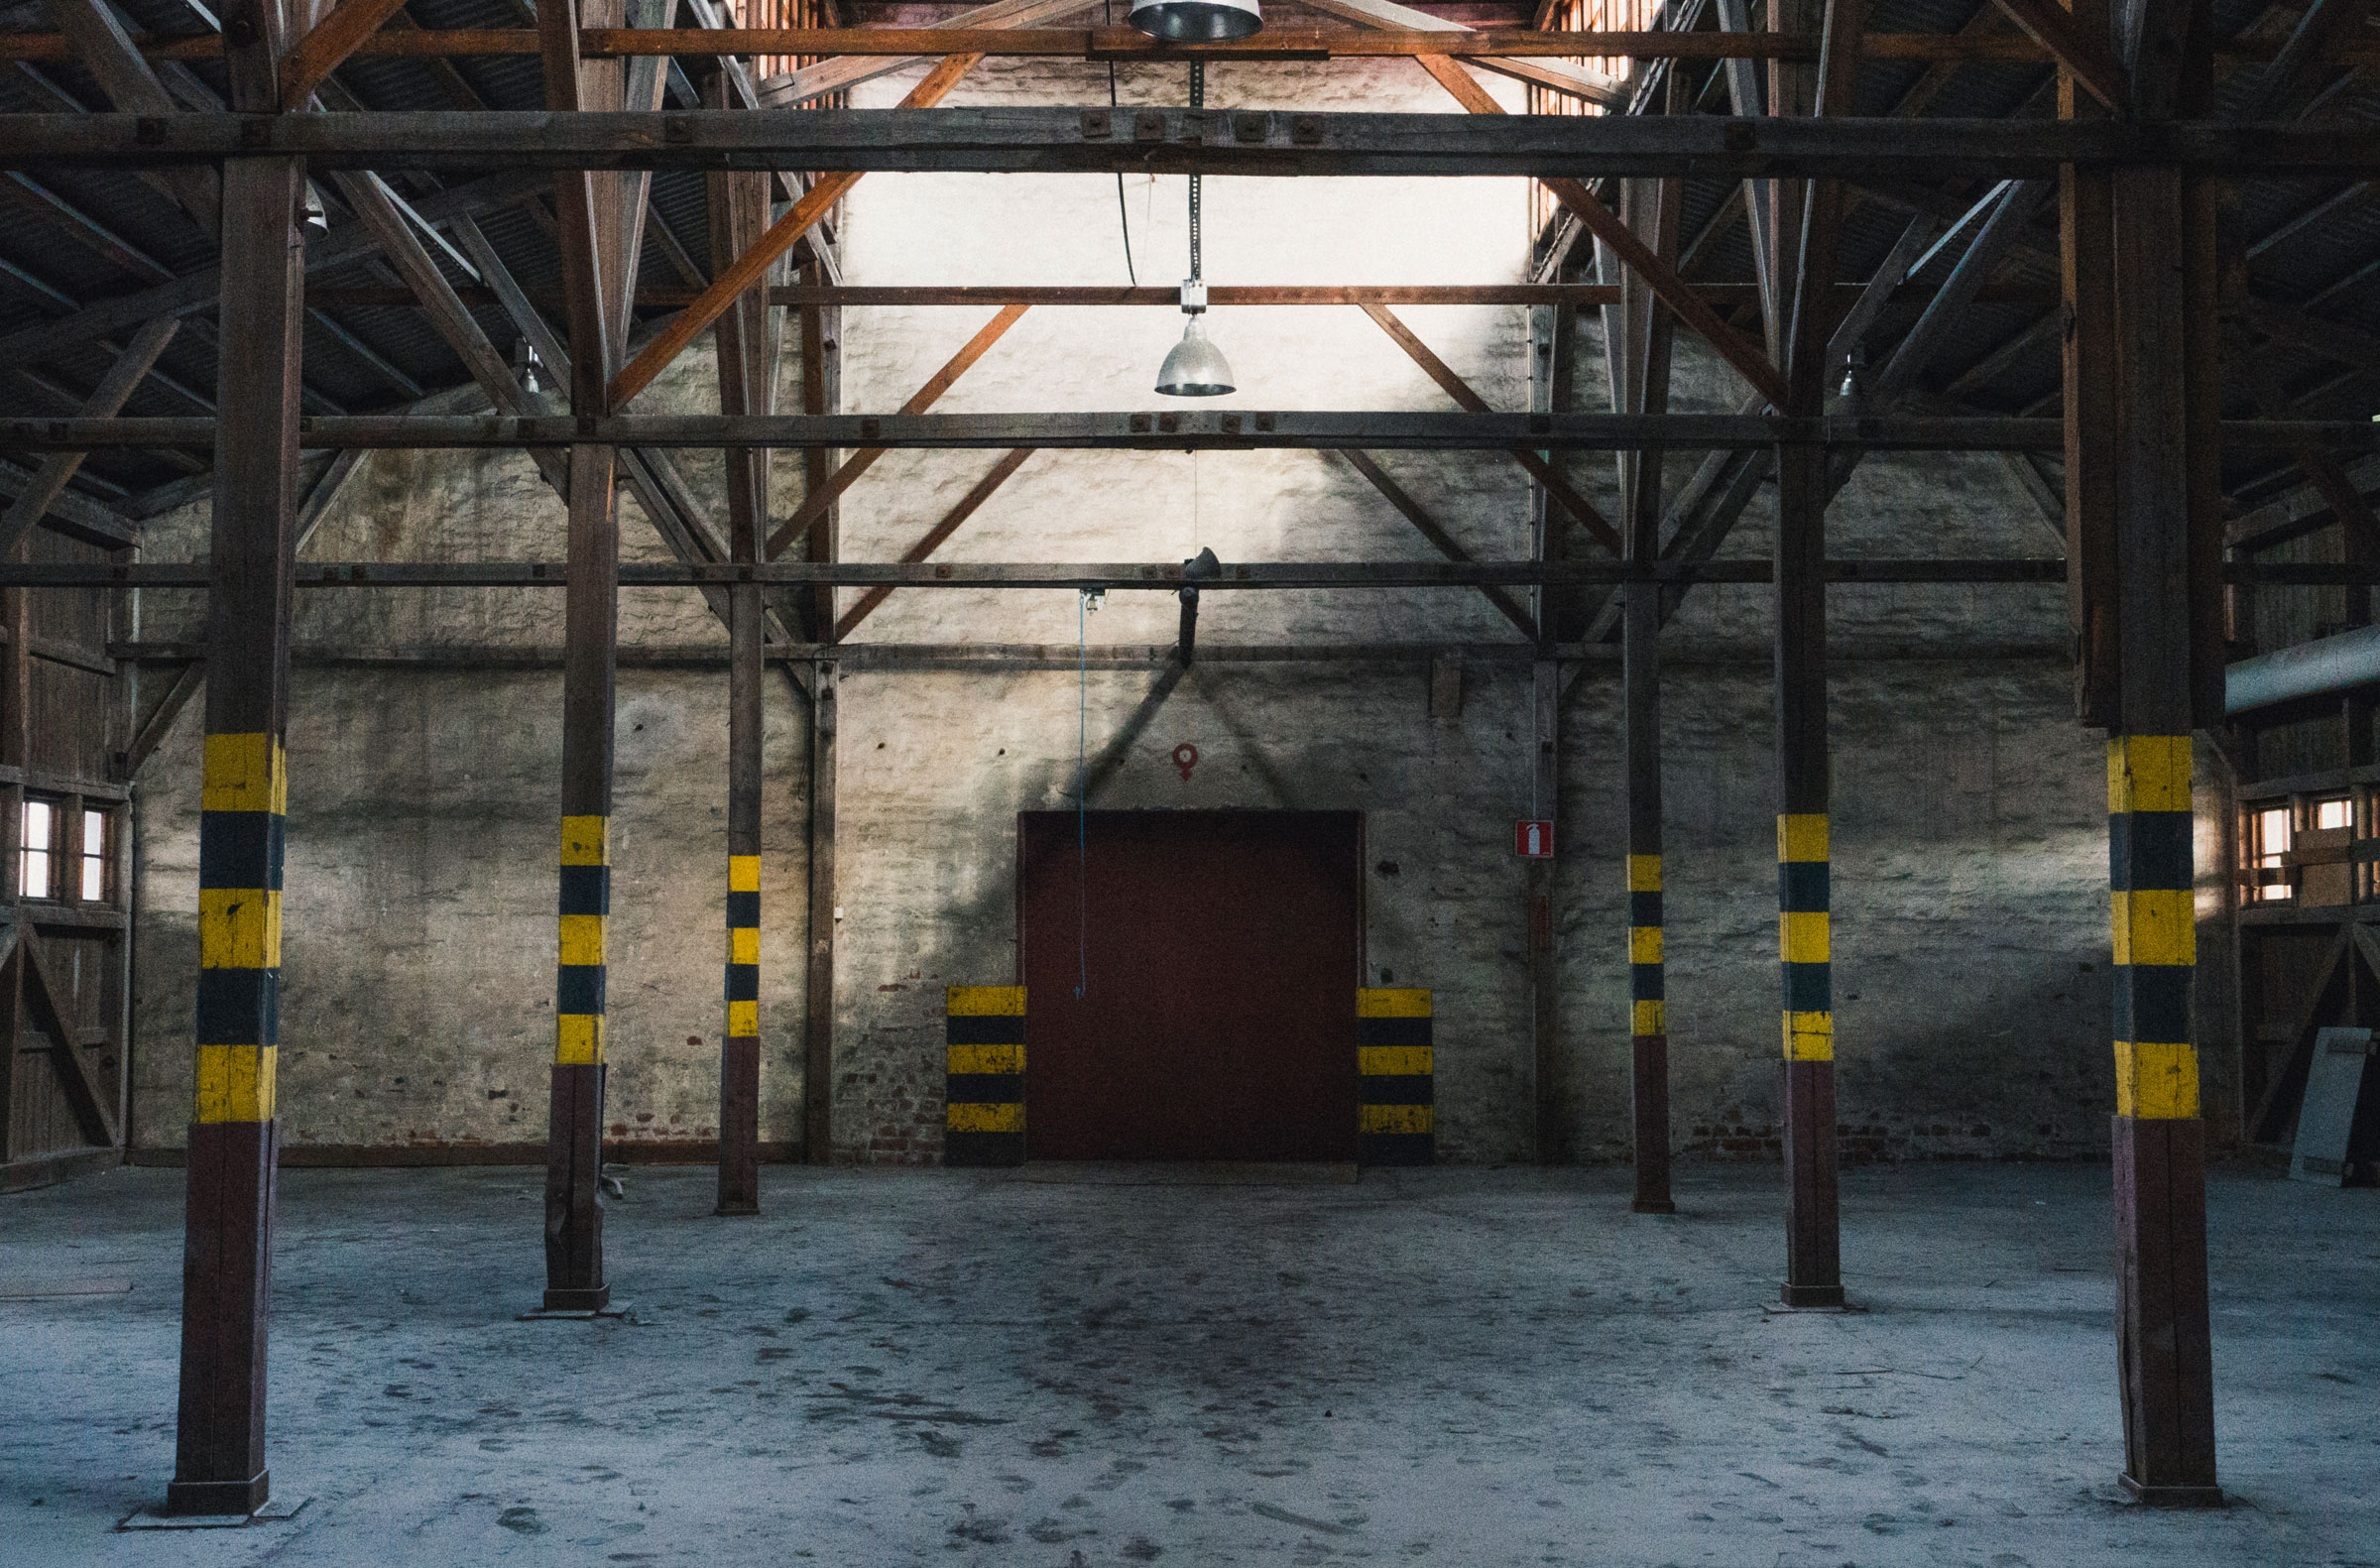 Urban Exploration Photography inside an abandoned warehouse building